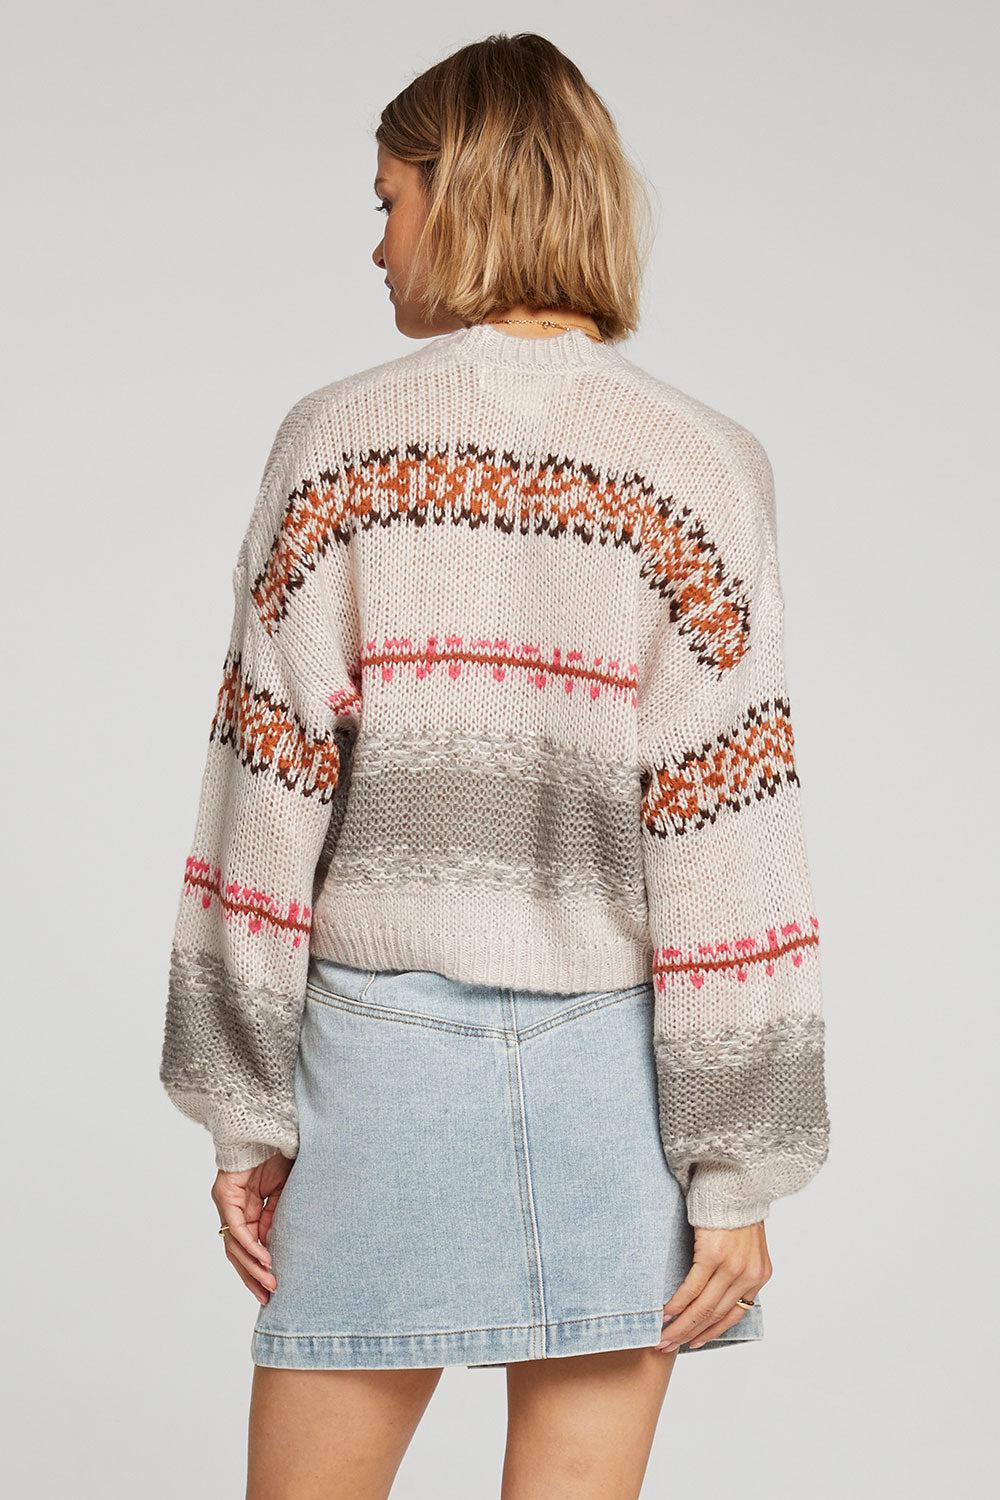 Saltwater Luxe- Lanette Sweater